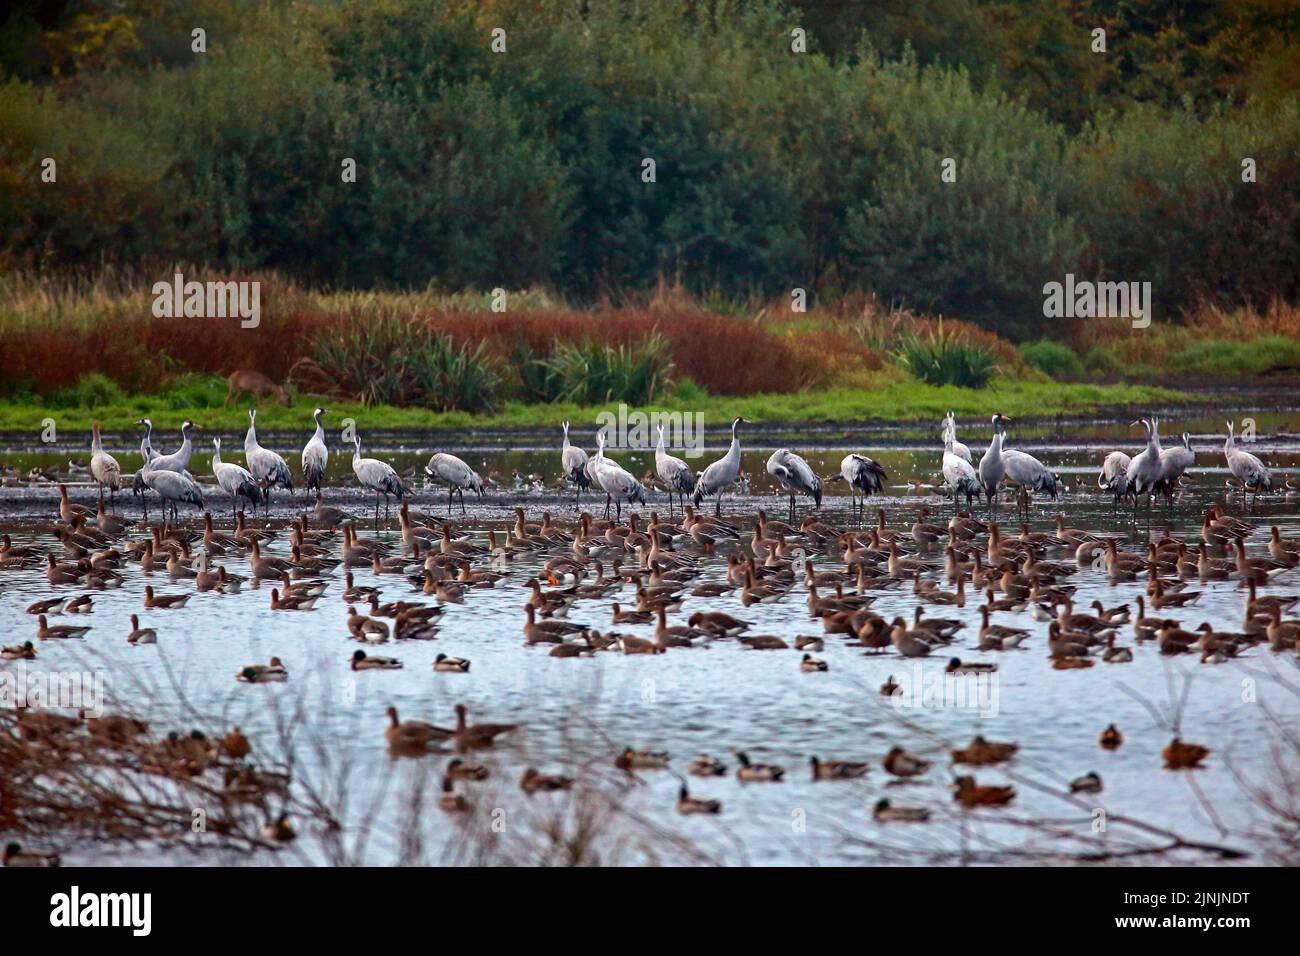 Common crane, Eurasian Crane (Grus grus), cranes, been geese(Anser fabalis) and greater white-fronted geese (Anser albifrons) at resting place, Stock Photo